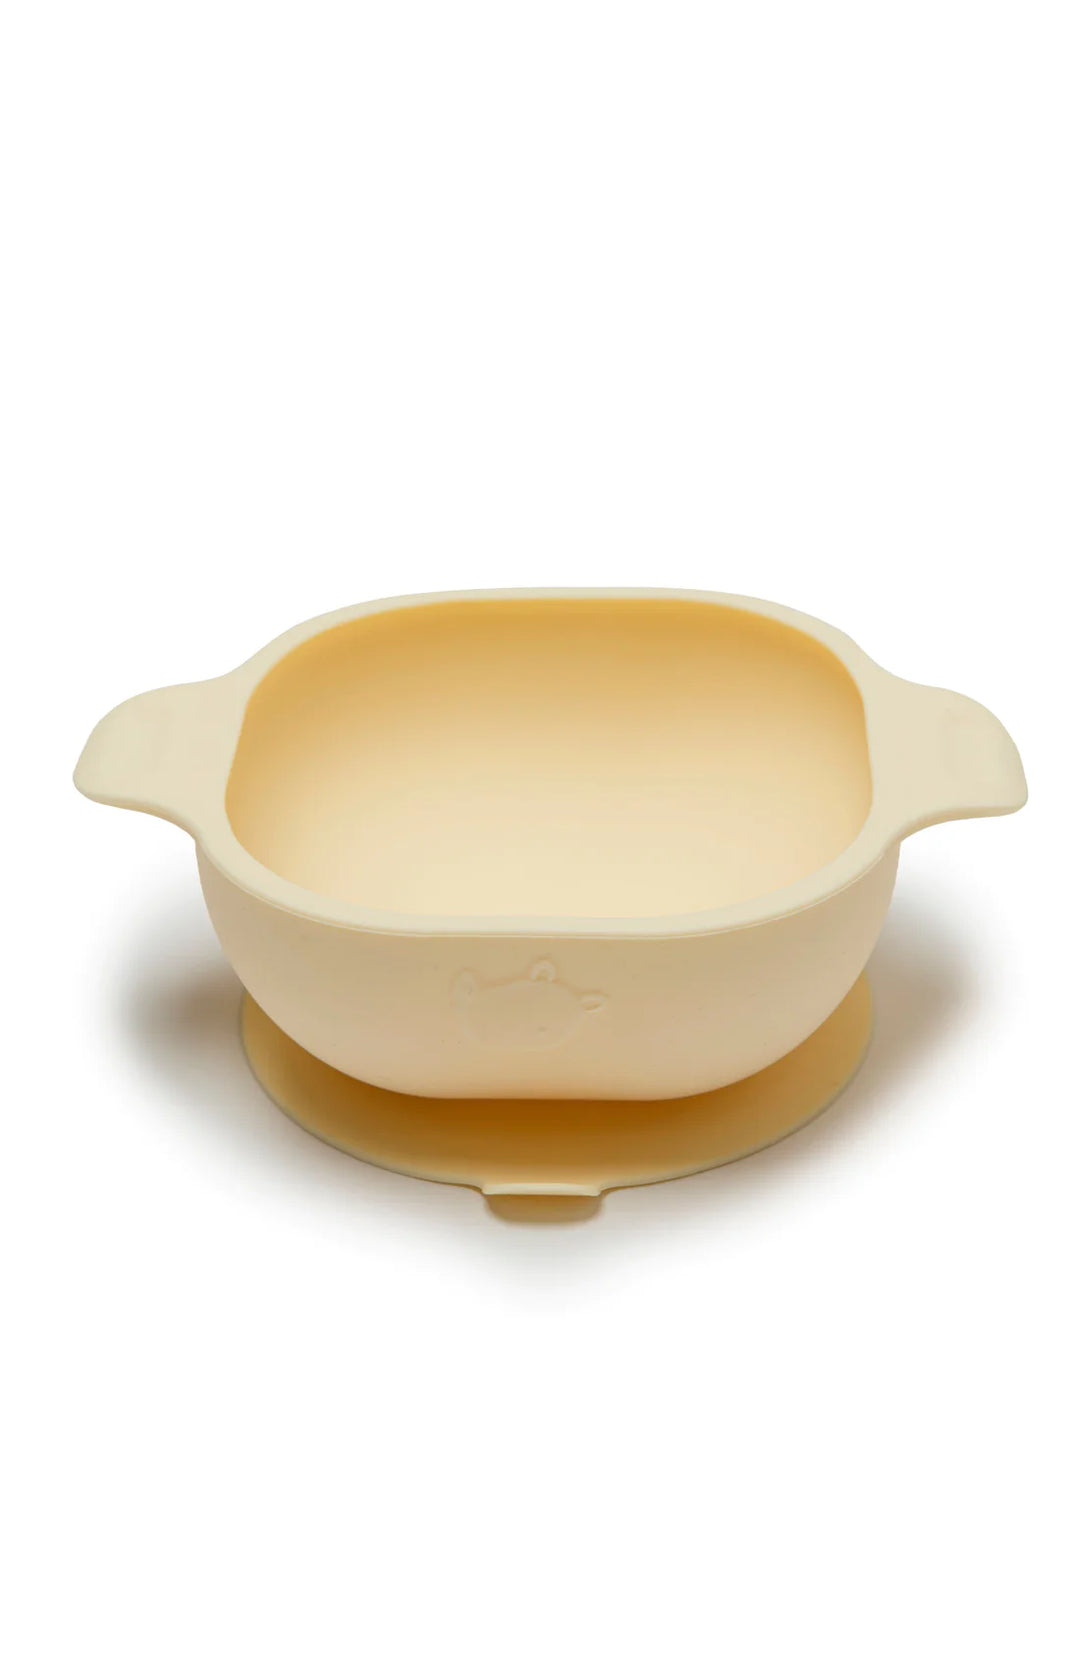 Silicone Snack Bowl in Yellow by Loulou Lollipop